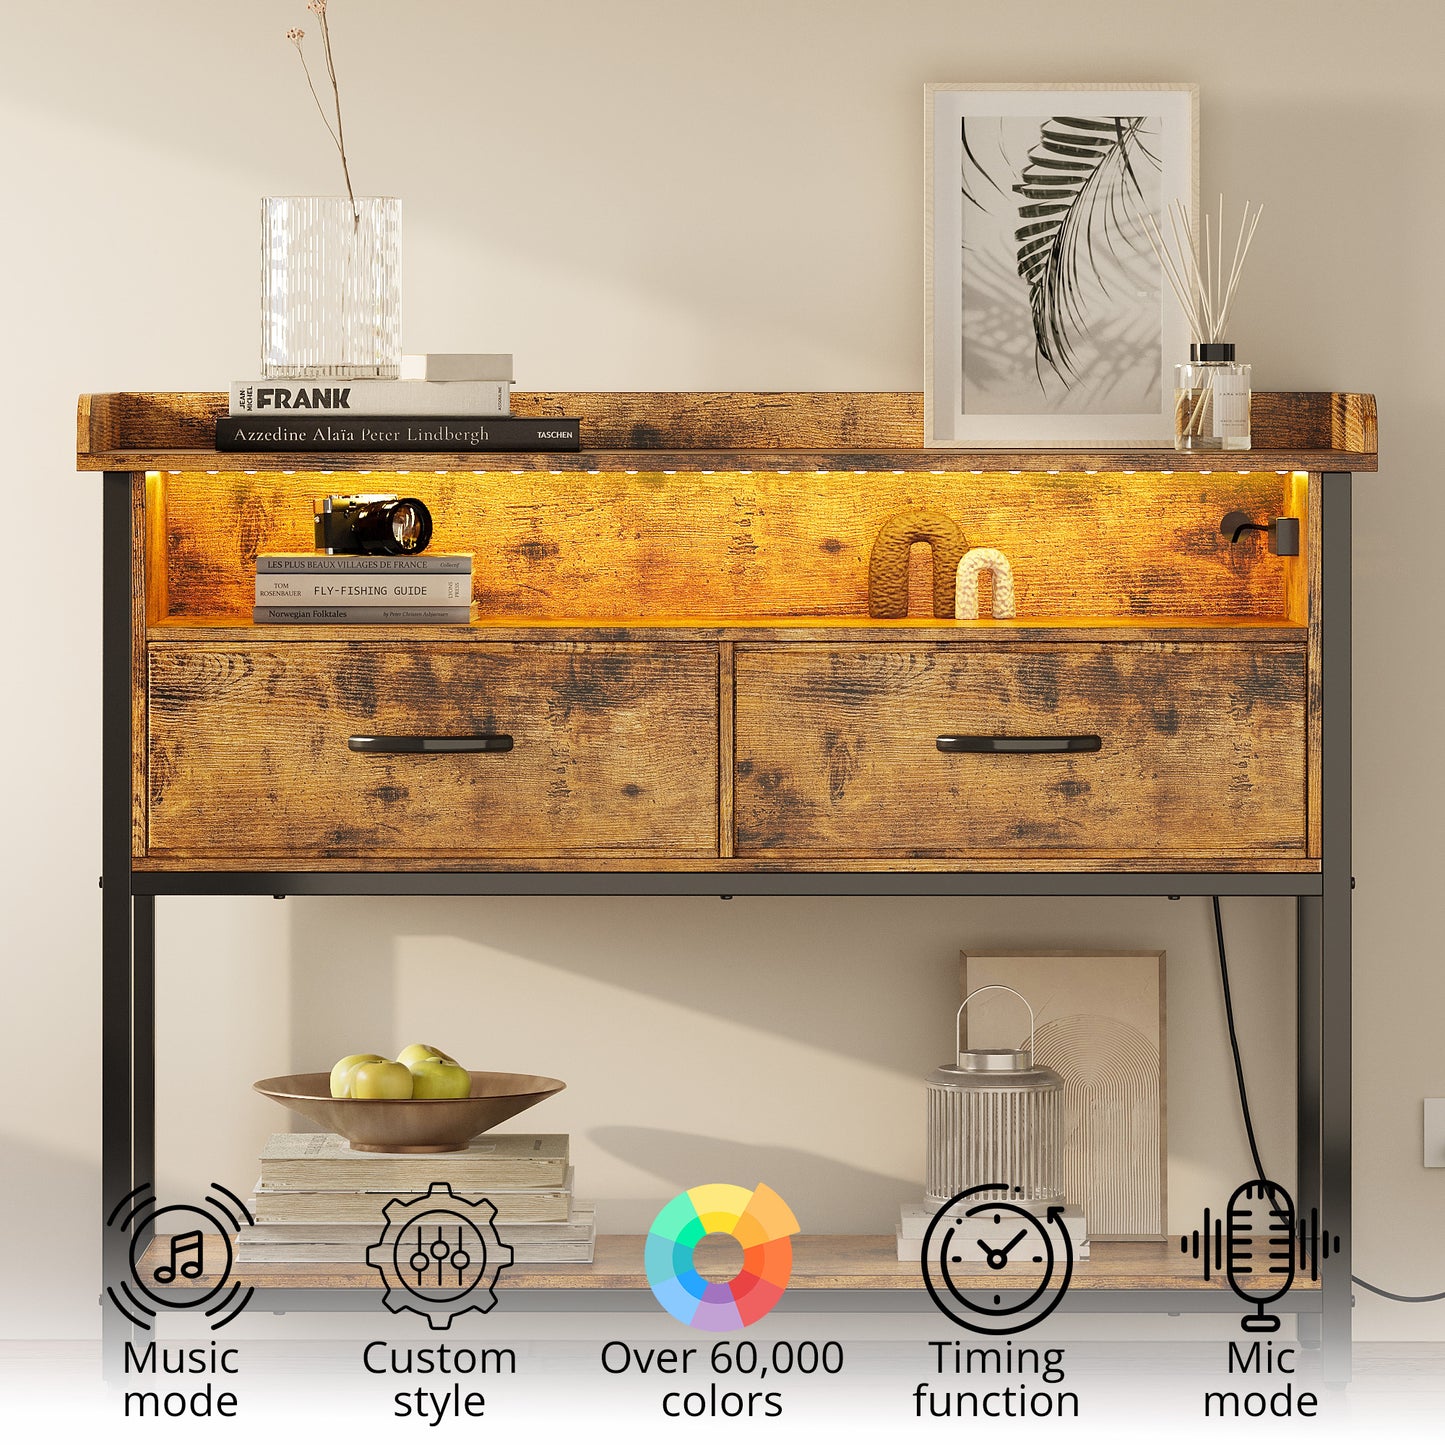 IRONCK LED Entryway Table with 2 Fabric Drawers